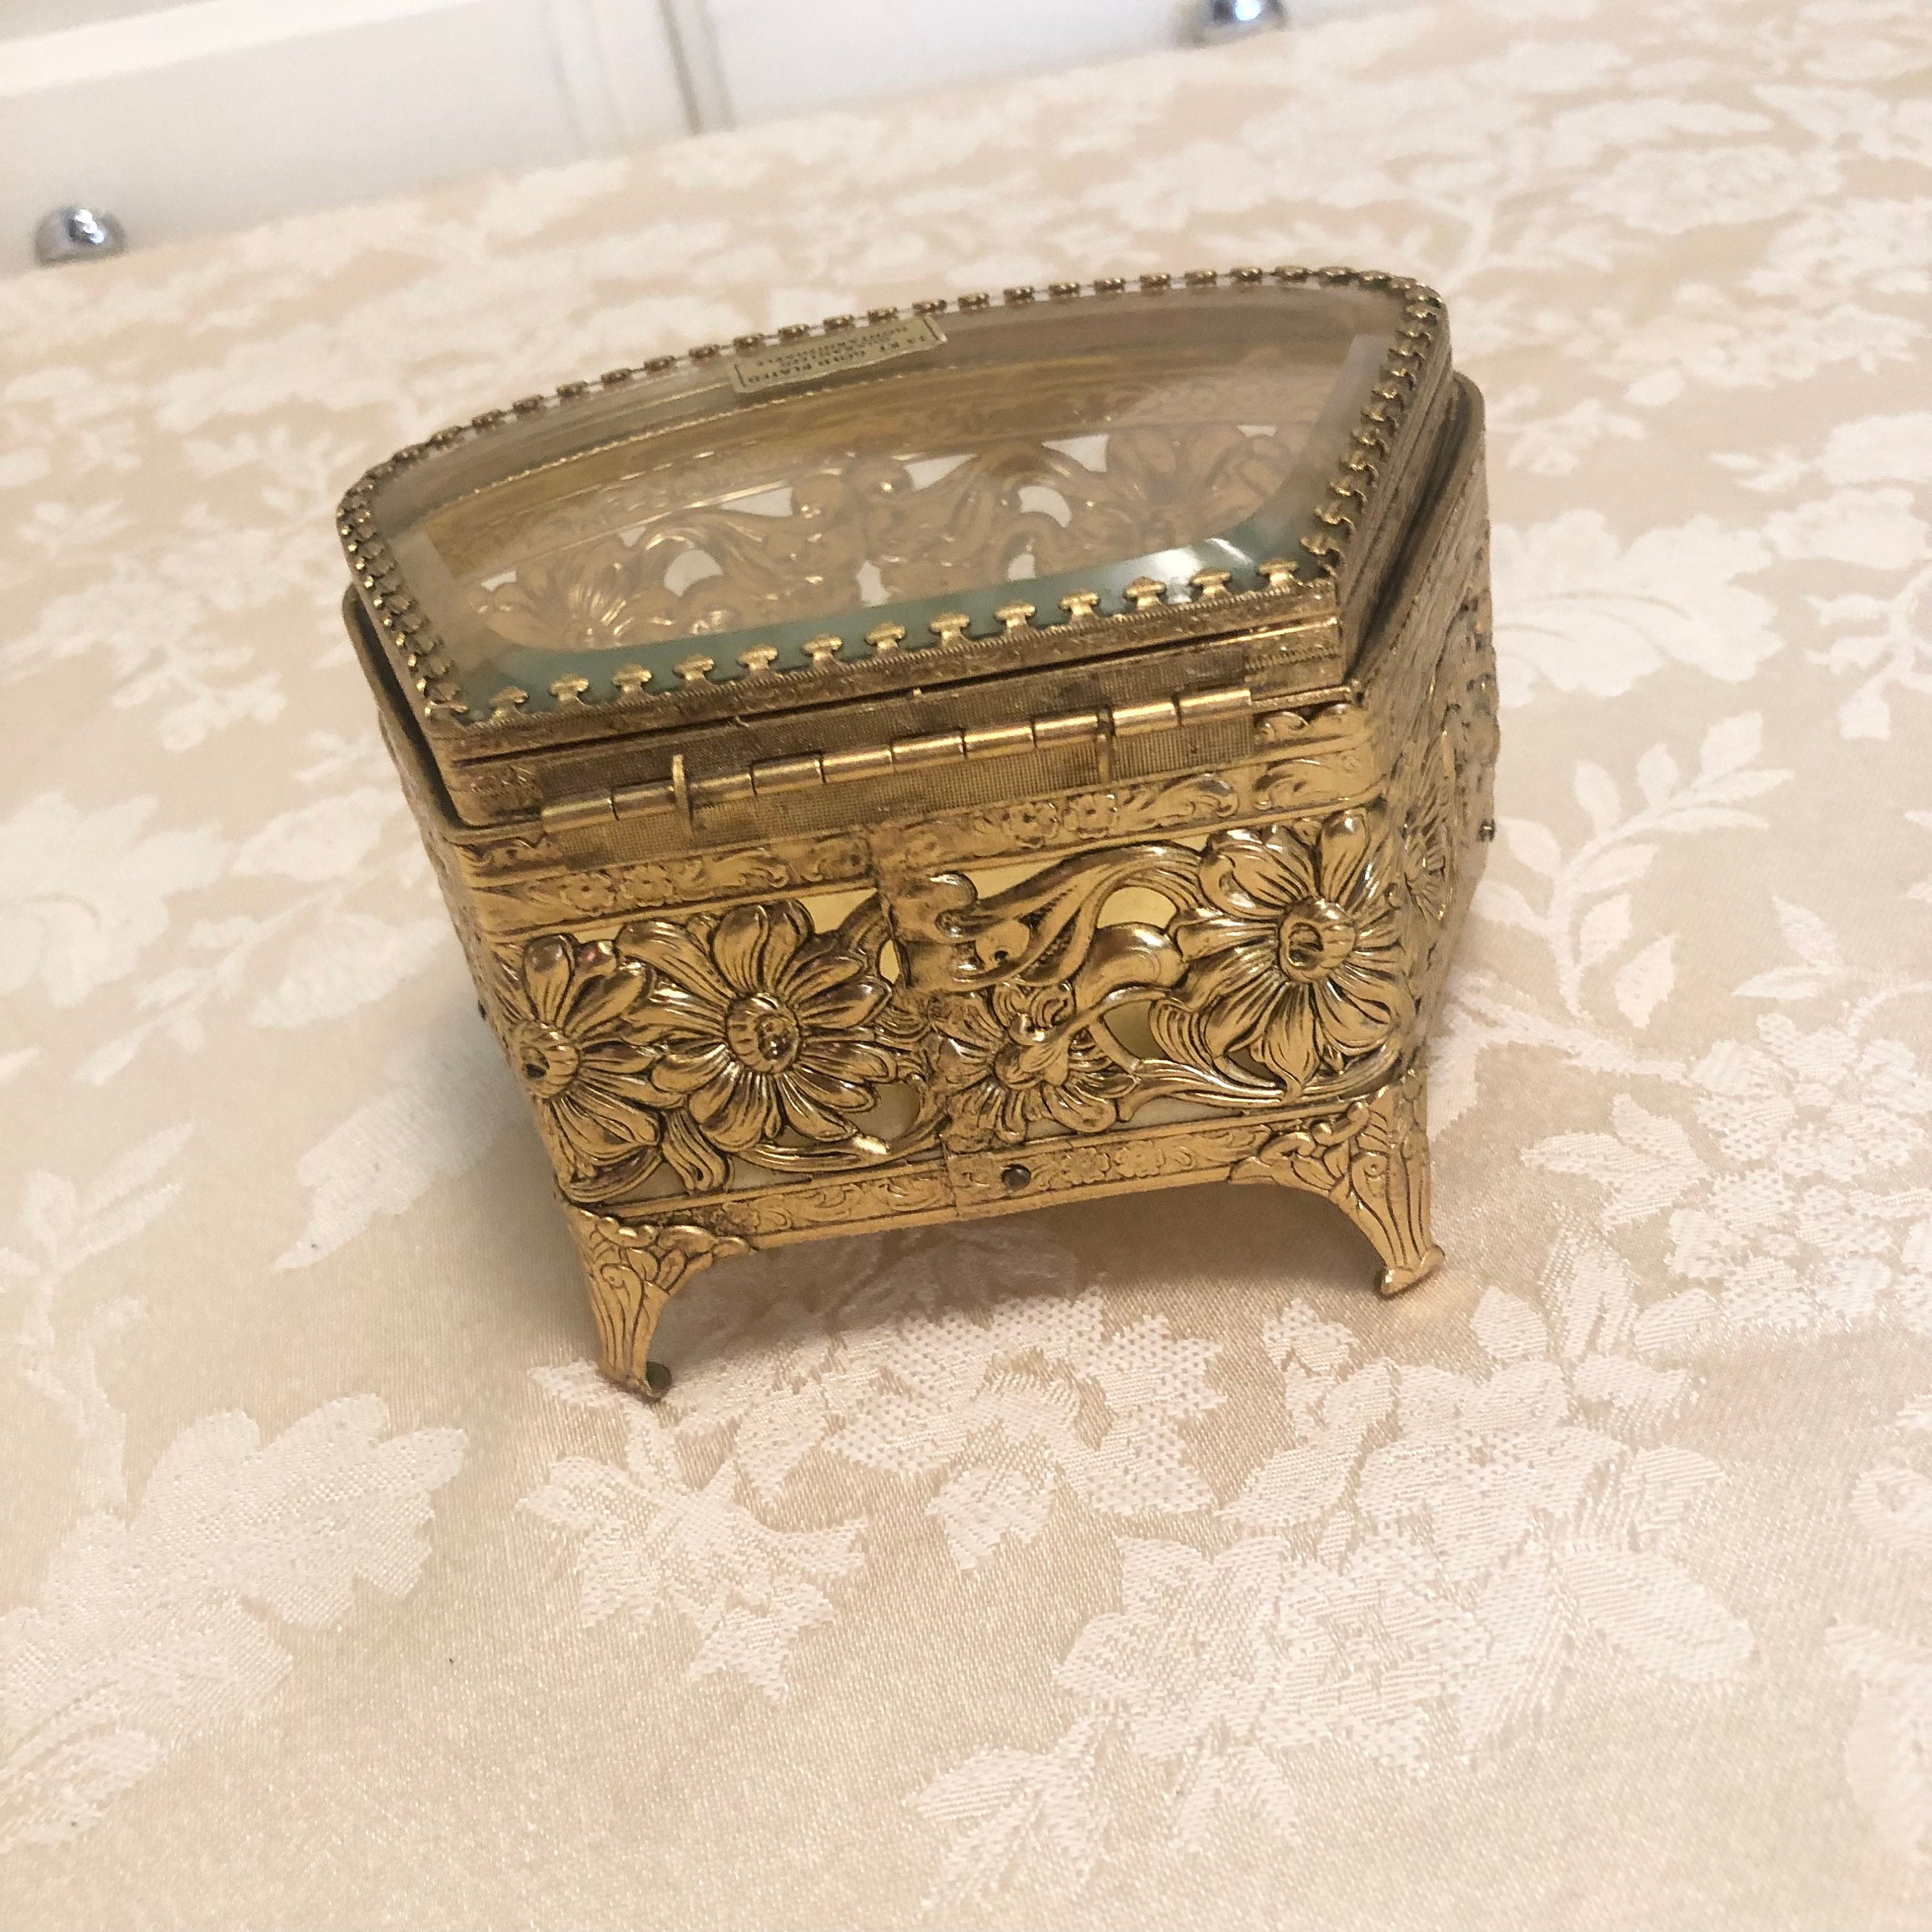 Pottery Barn Antique Gold Jewelry Boxes - ShopStyle Home & Living